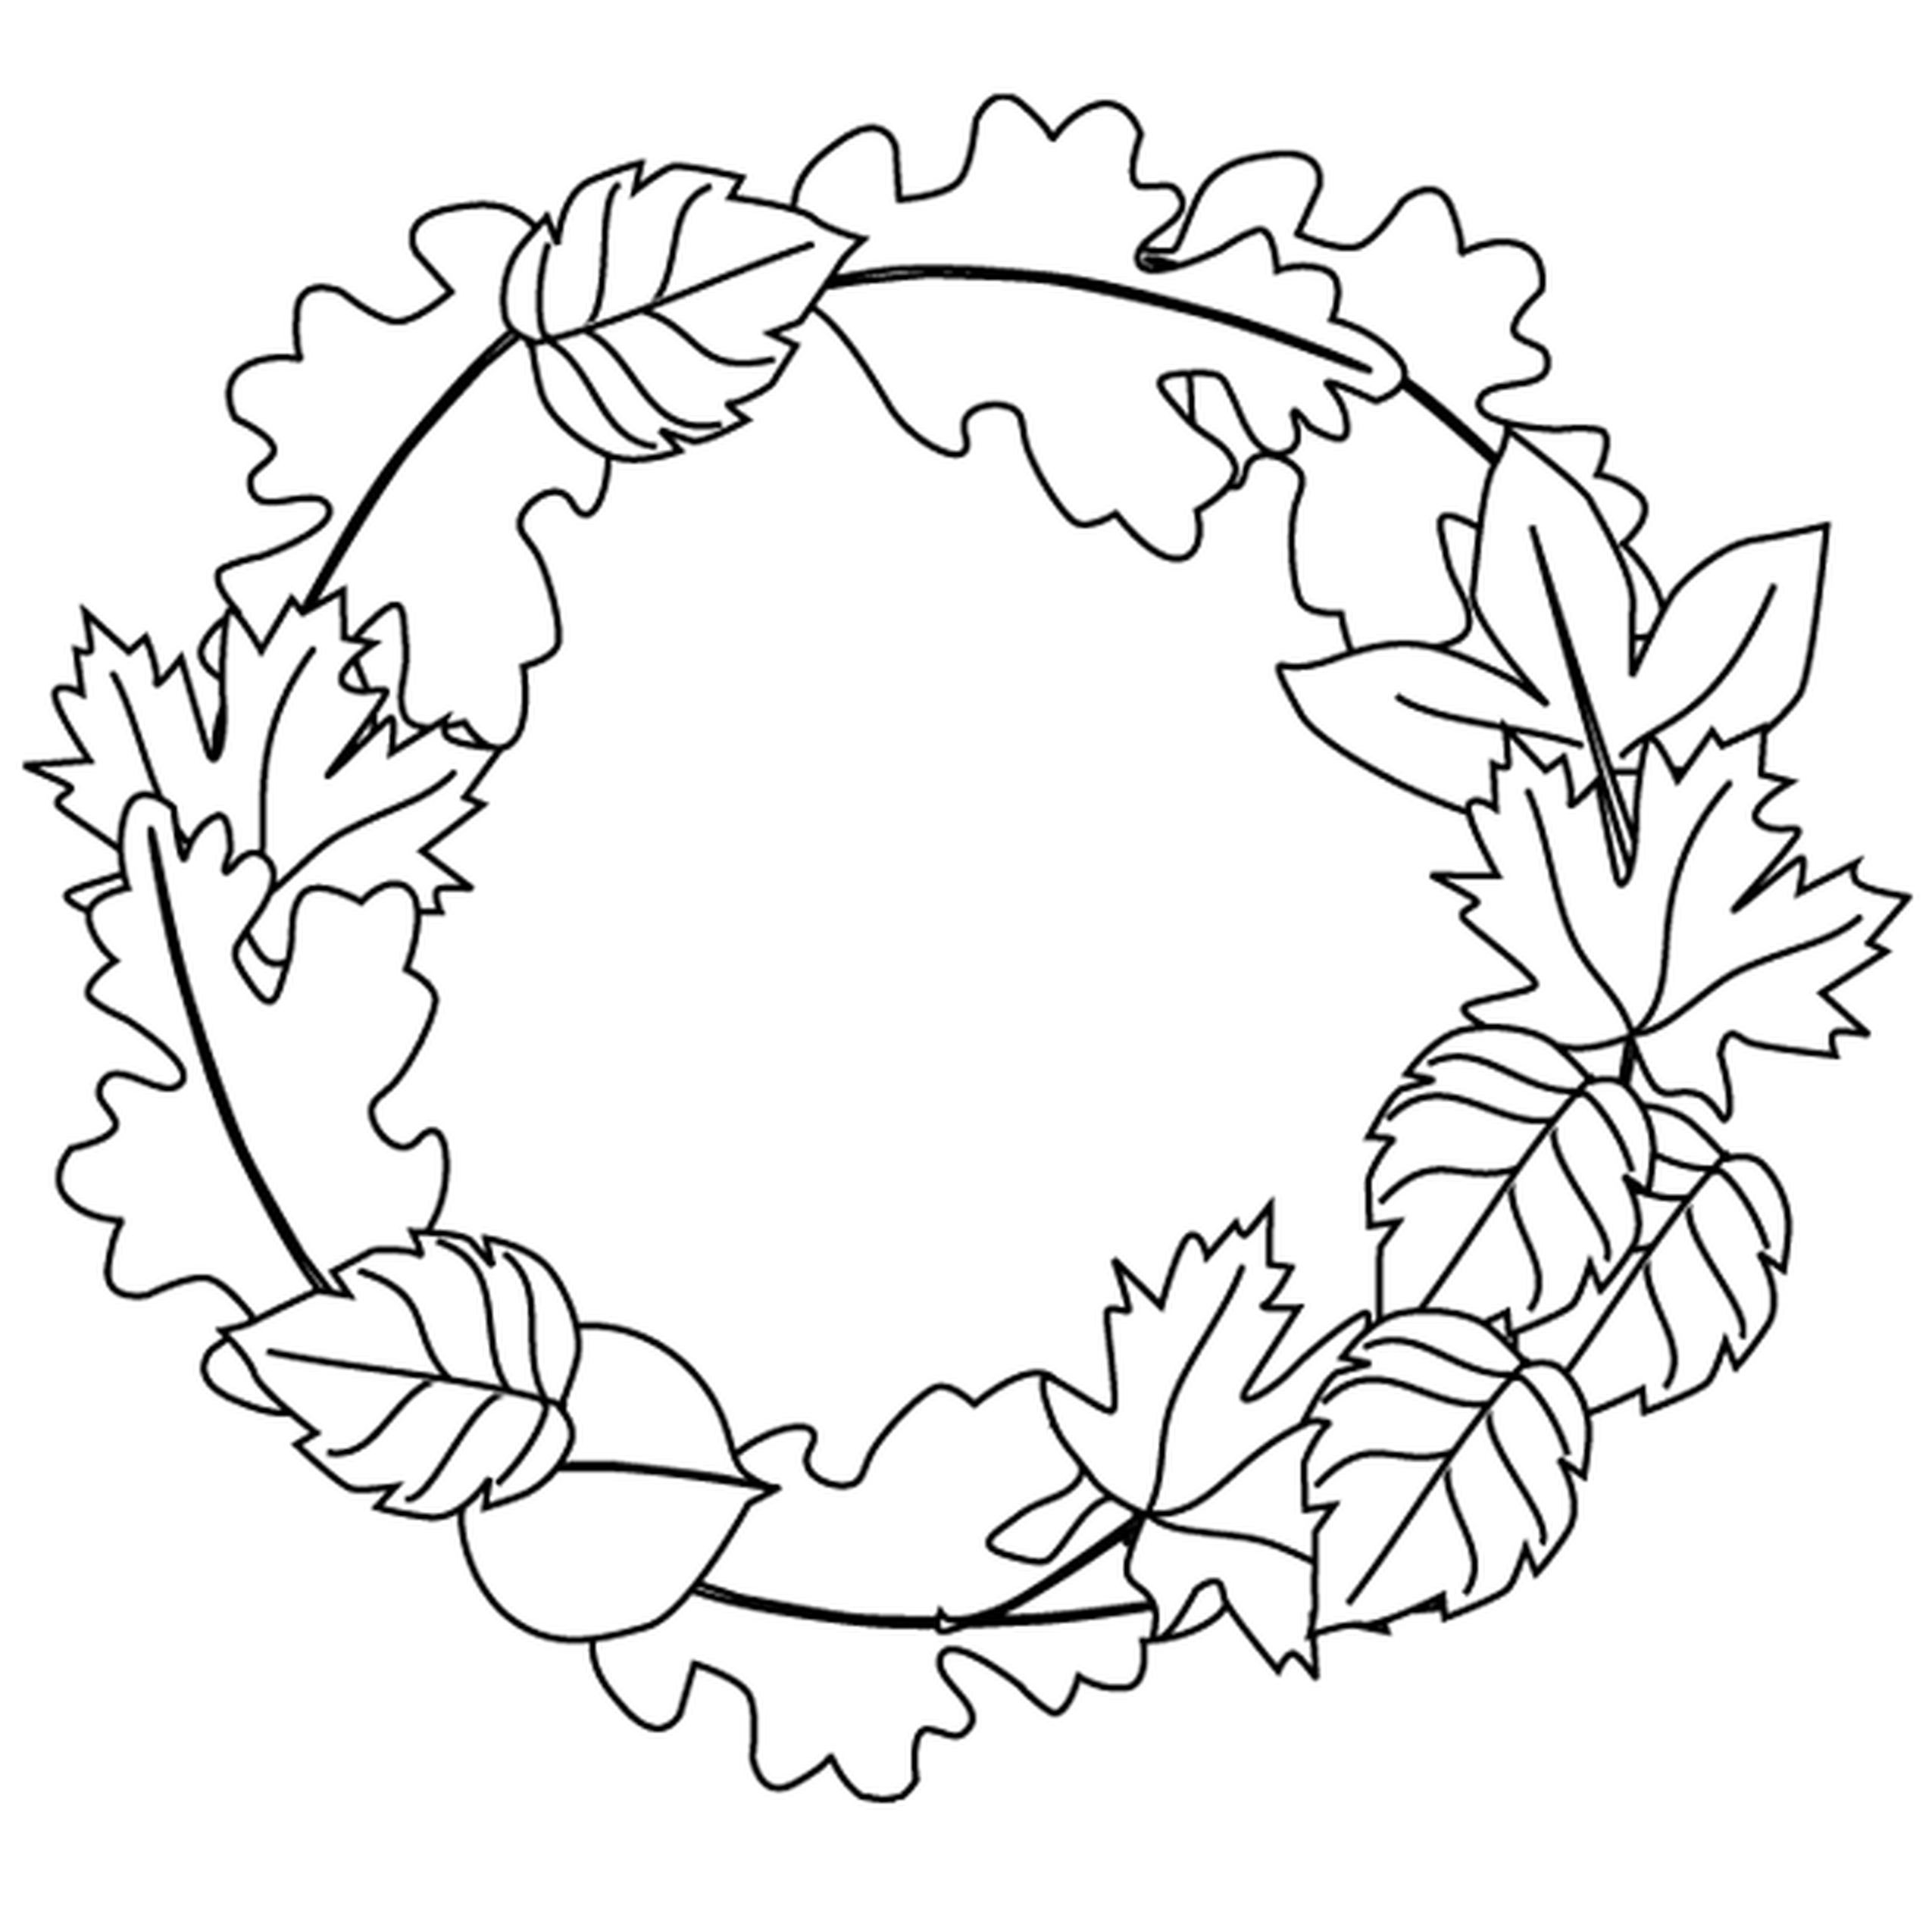 Free Coloring Pages Of Leaves Coloring Ideas Autumn Leaves Coloring Pages Free On Art Photo 48